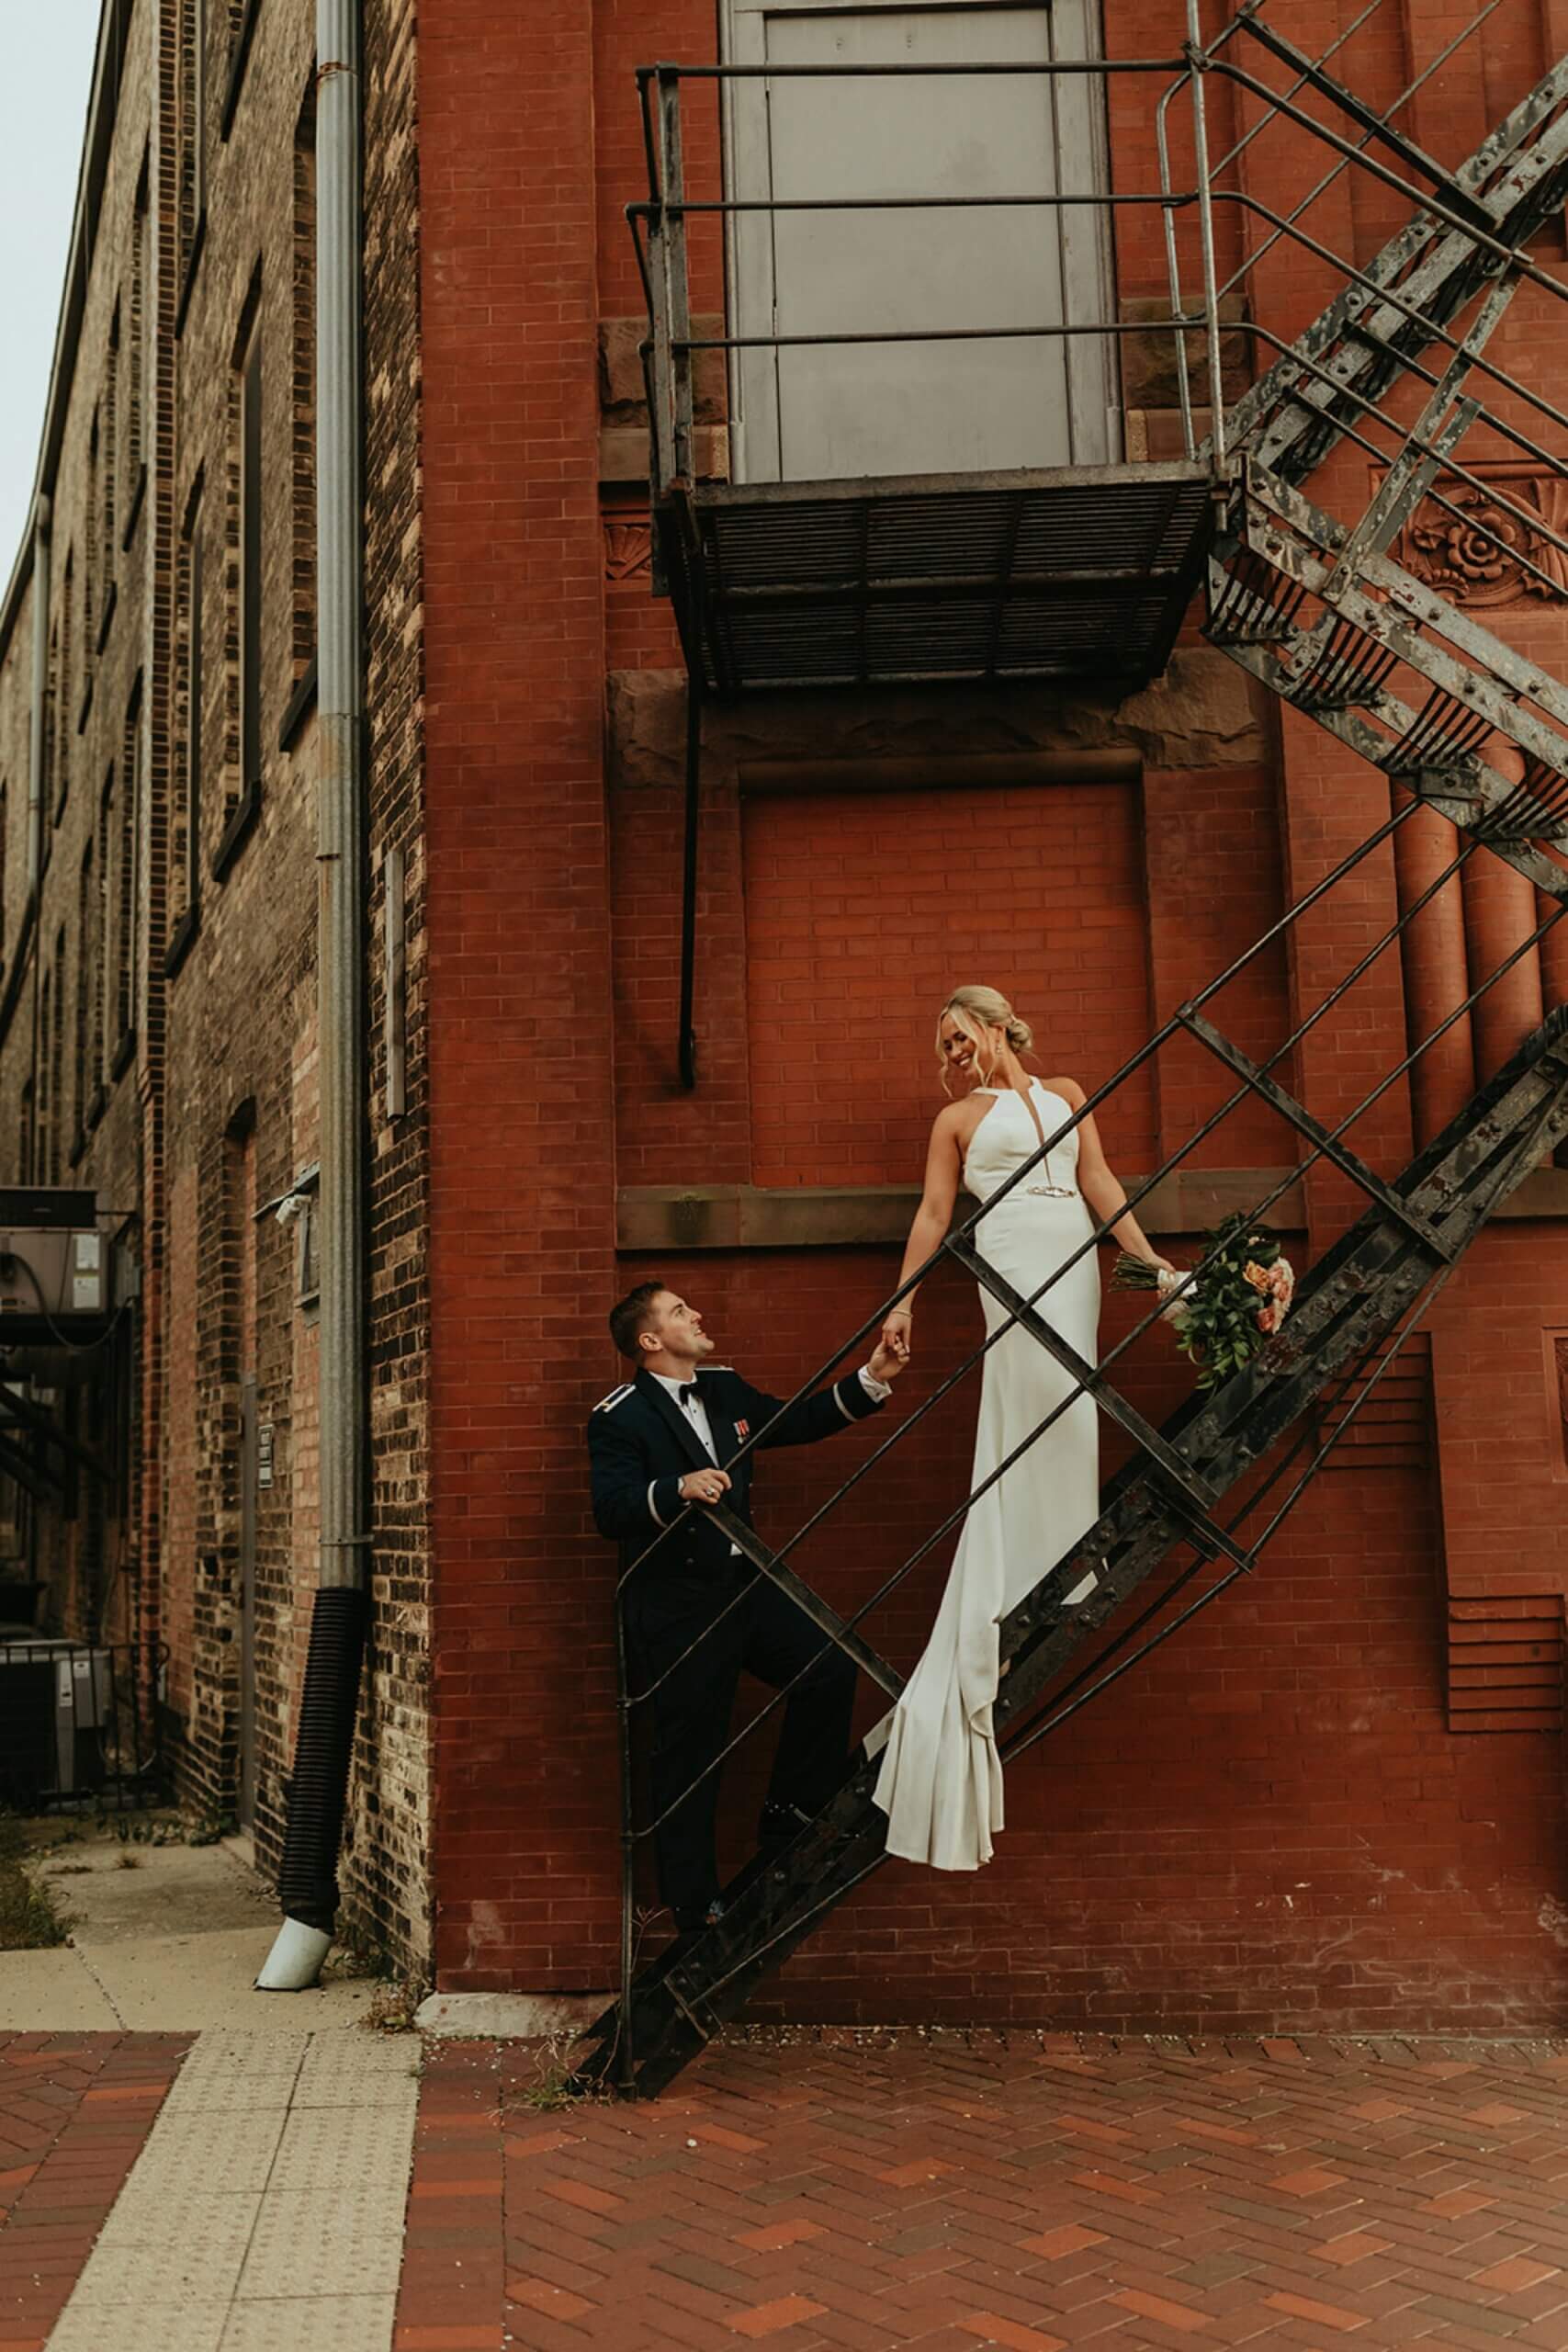 Bride standing on stairs on outside of building looking down at groom